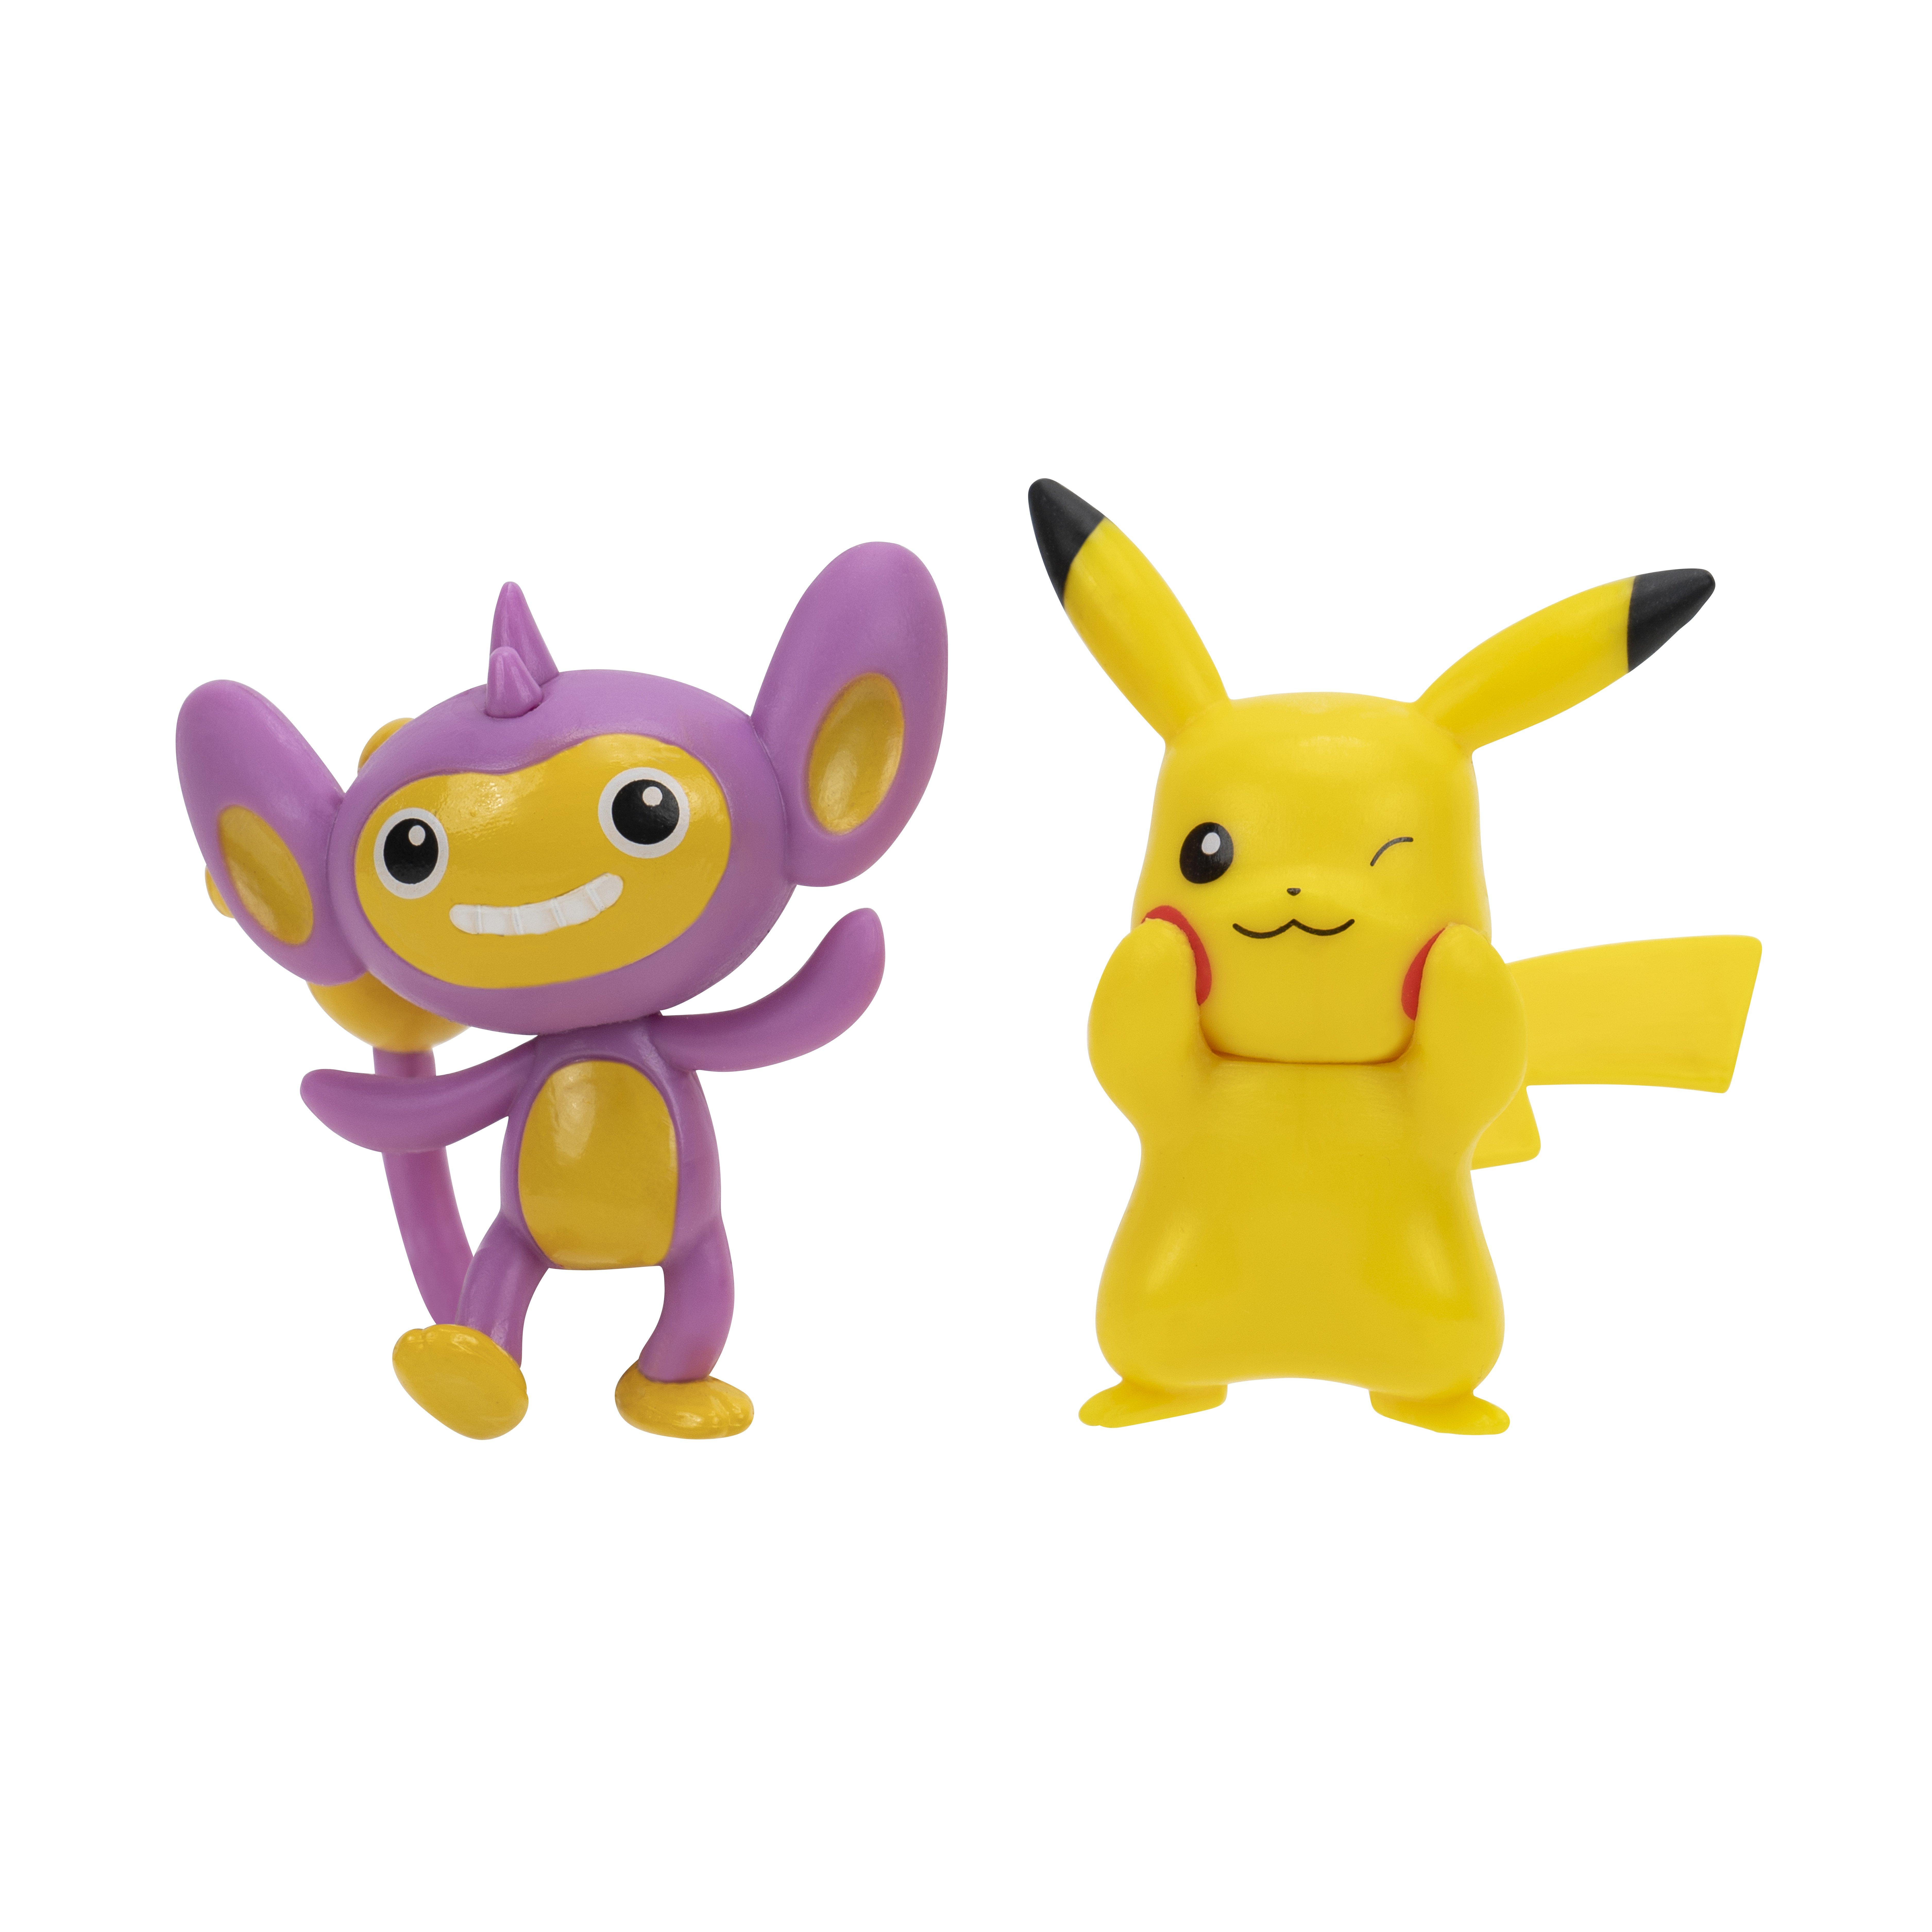 Pokemon Battle Action Figure 2-Pack - Pikachu and Aipom